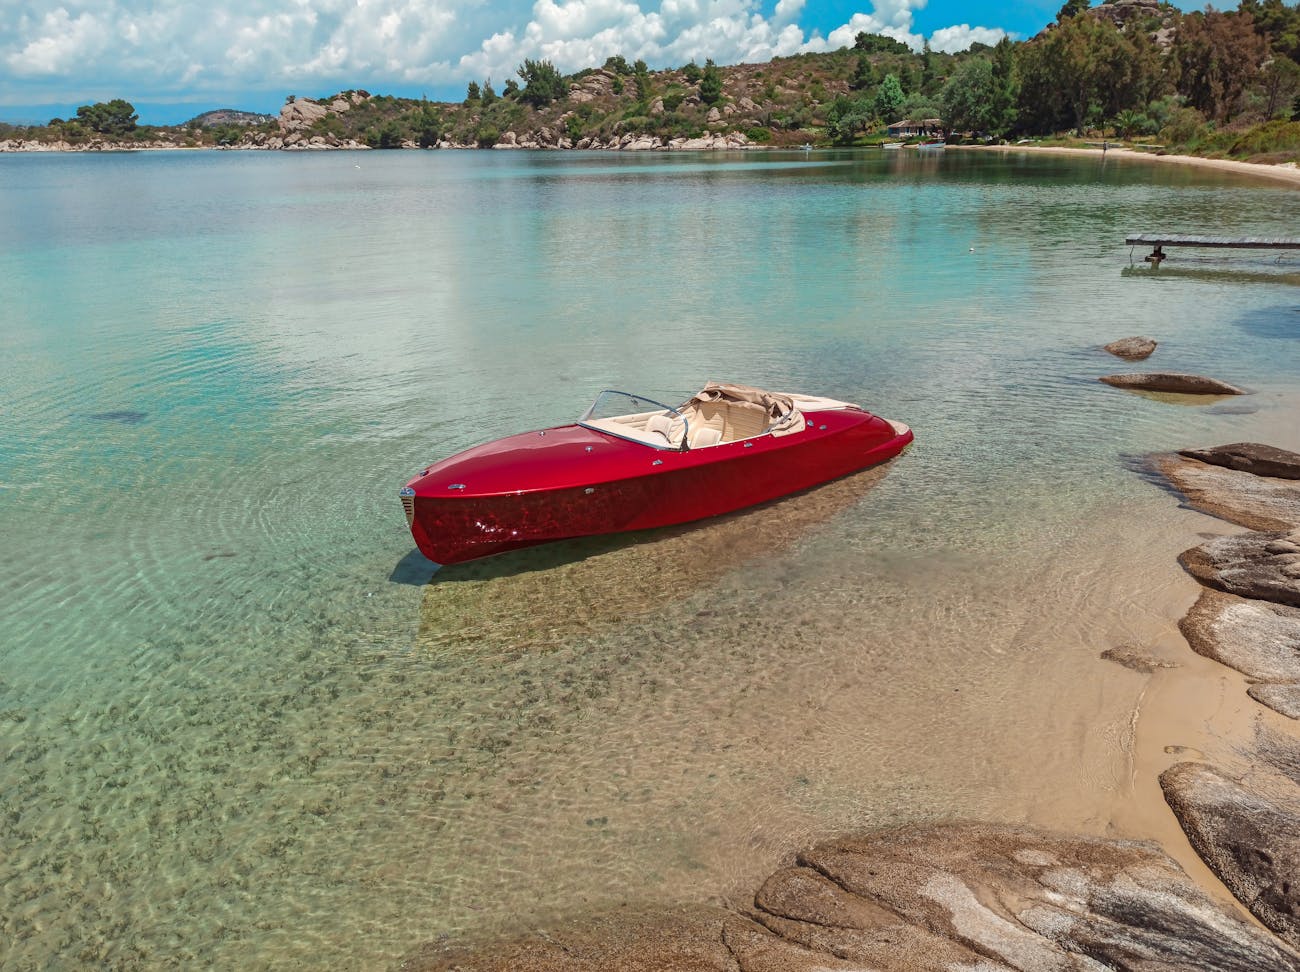 Red Hermes Speedster moored in clear waters of an inlet